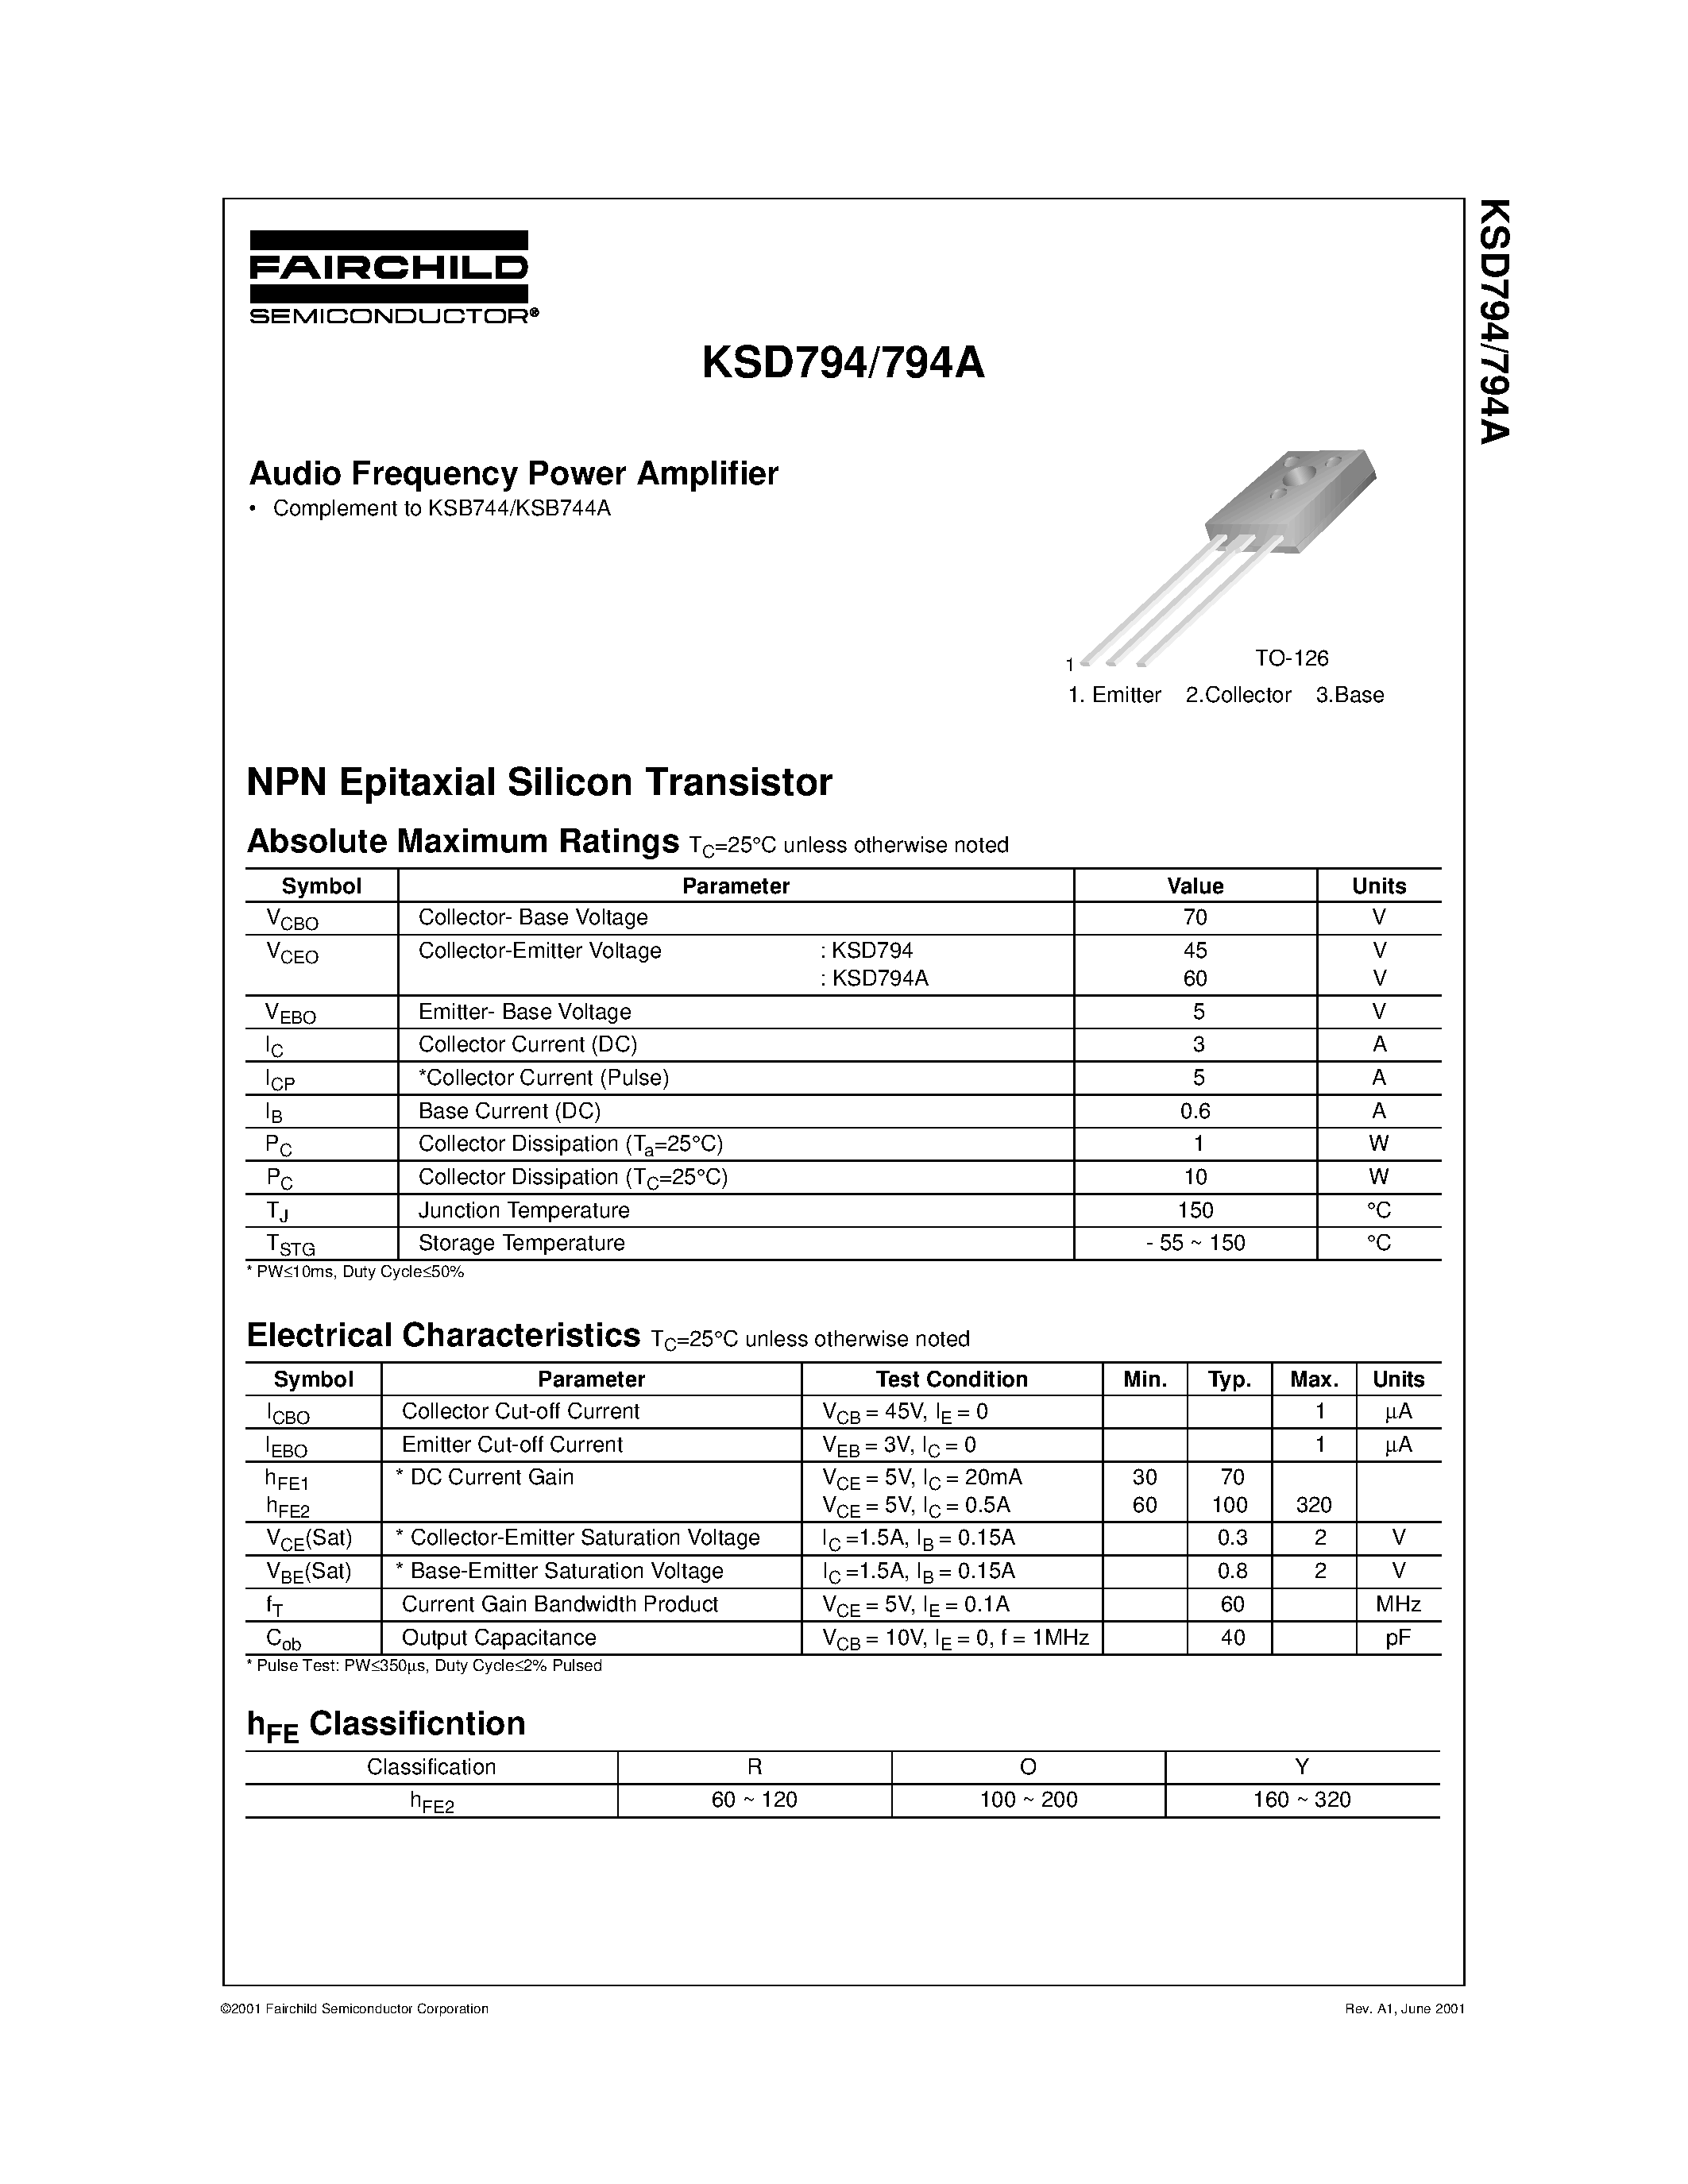 Datasheet KSD794 - Audio Frequency Power Amplifier page 1